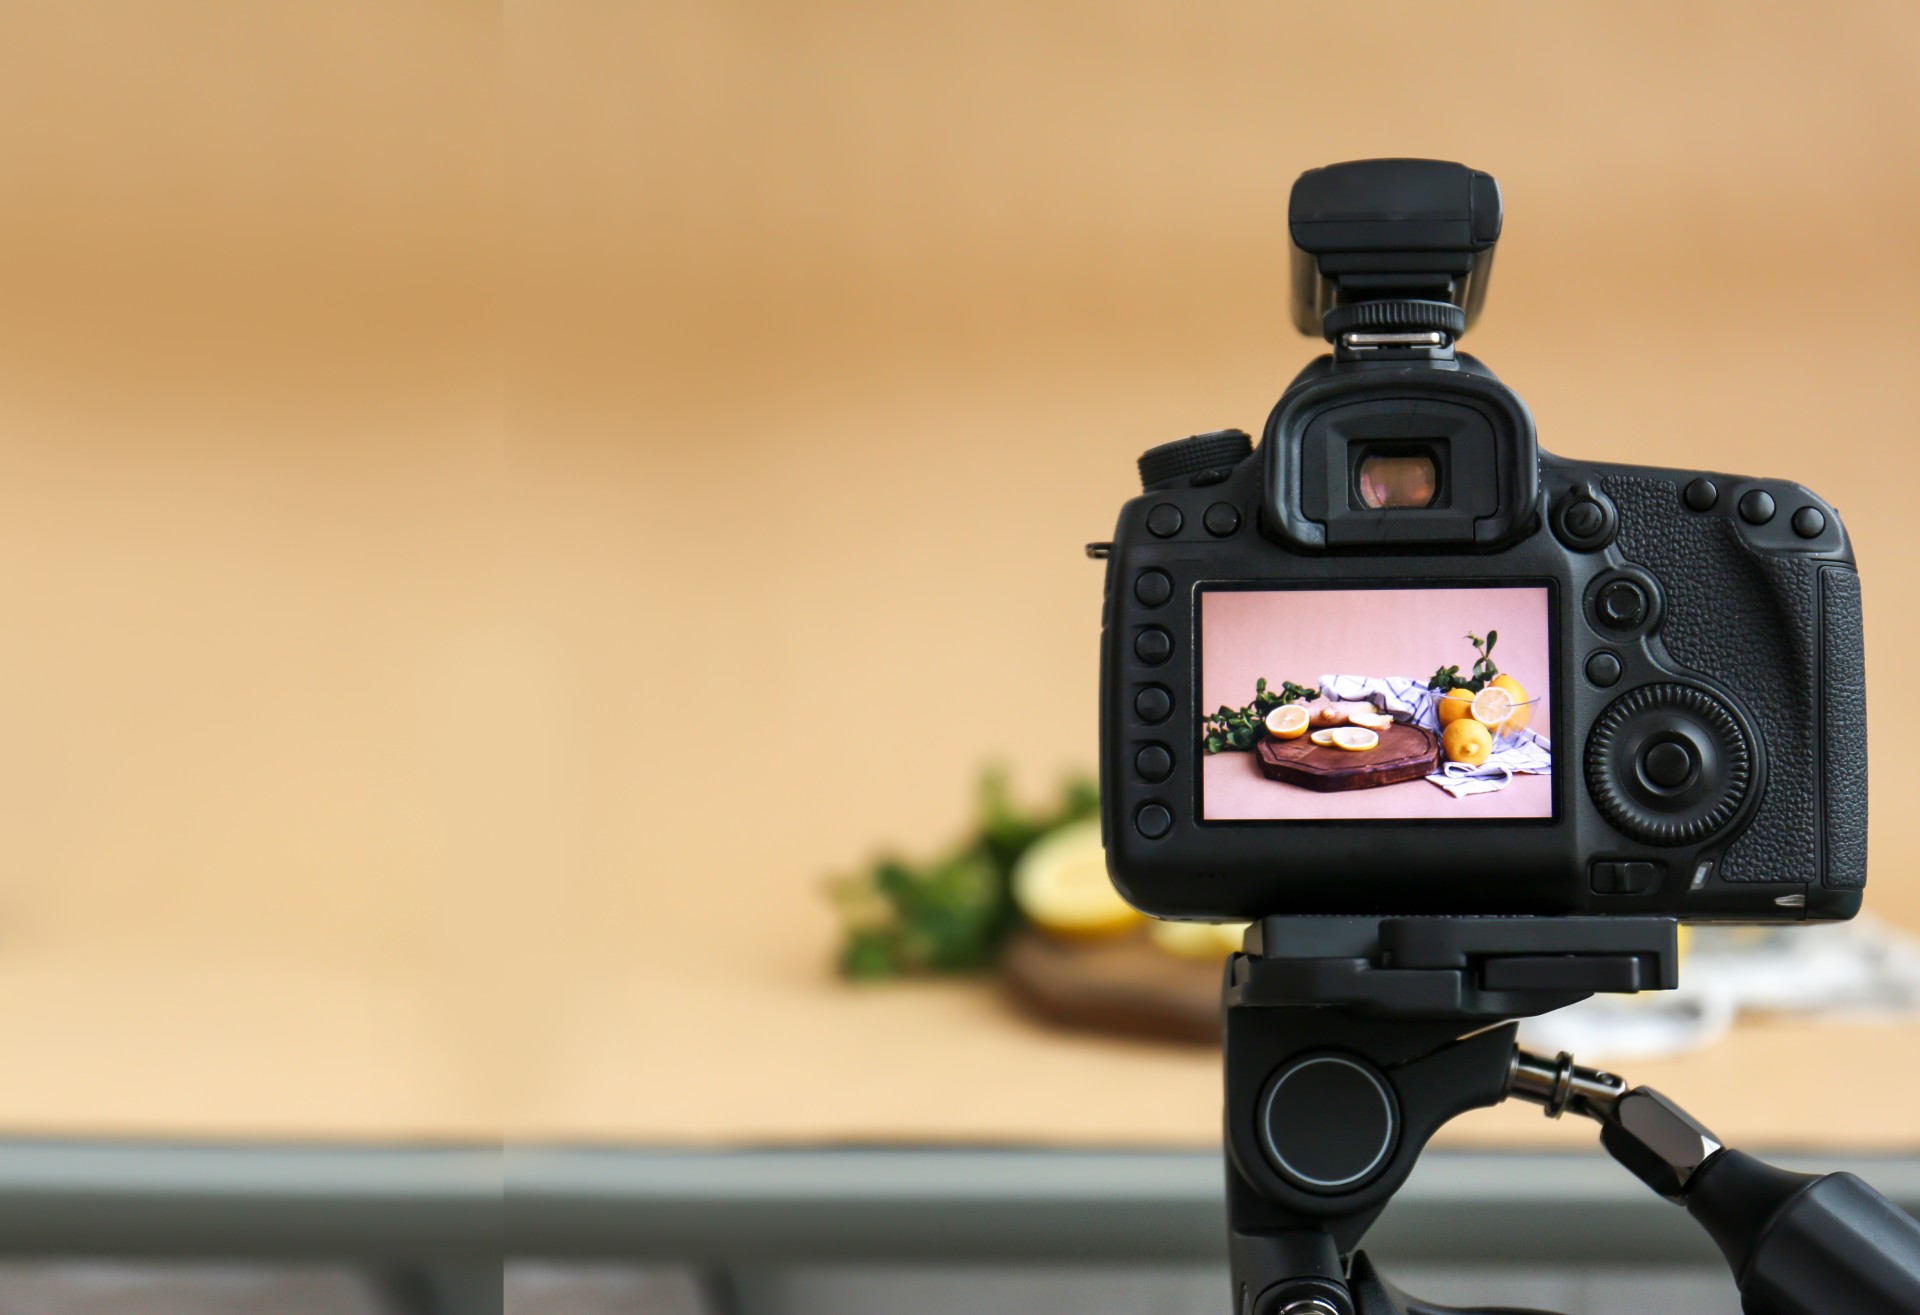 Amazon Product Photography Tips To Adopt In 2022